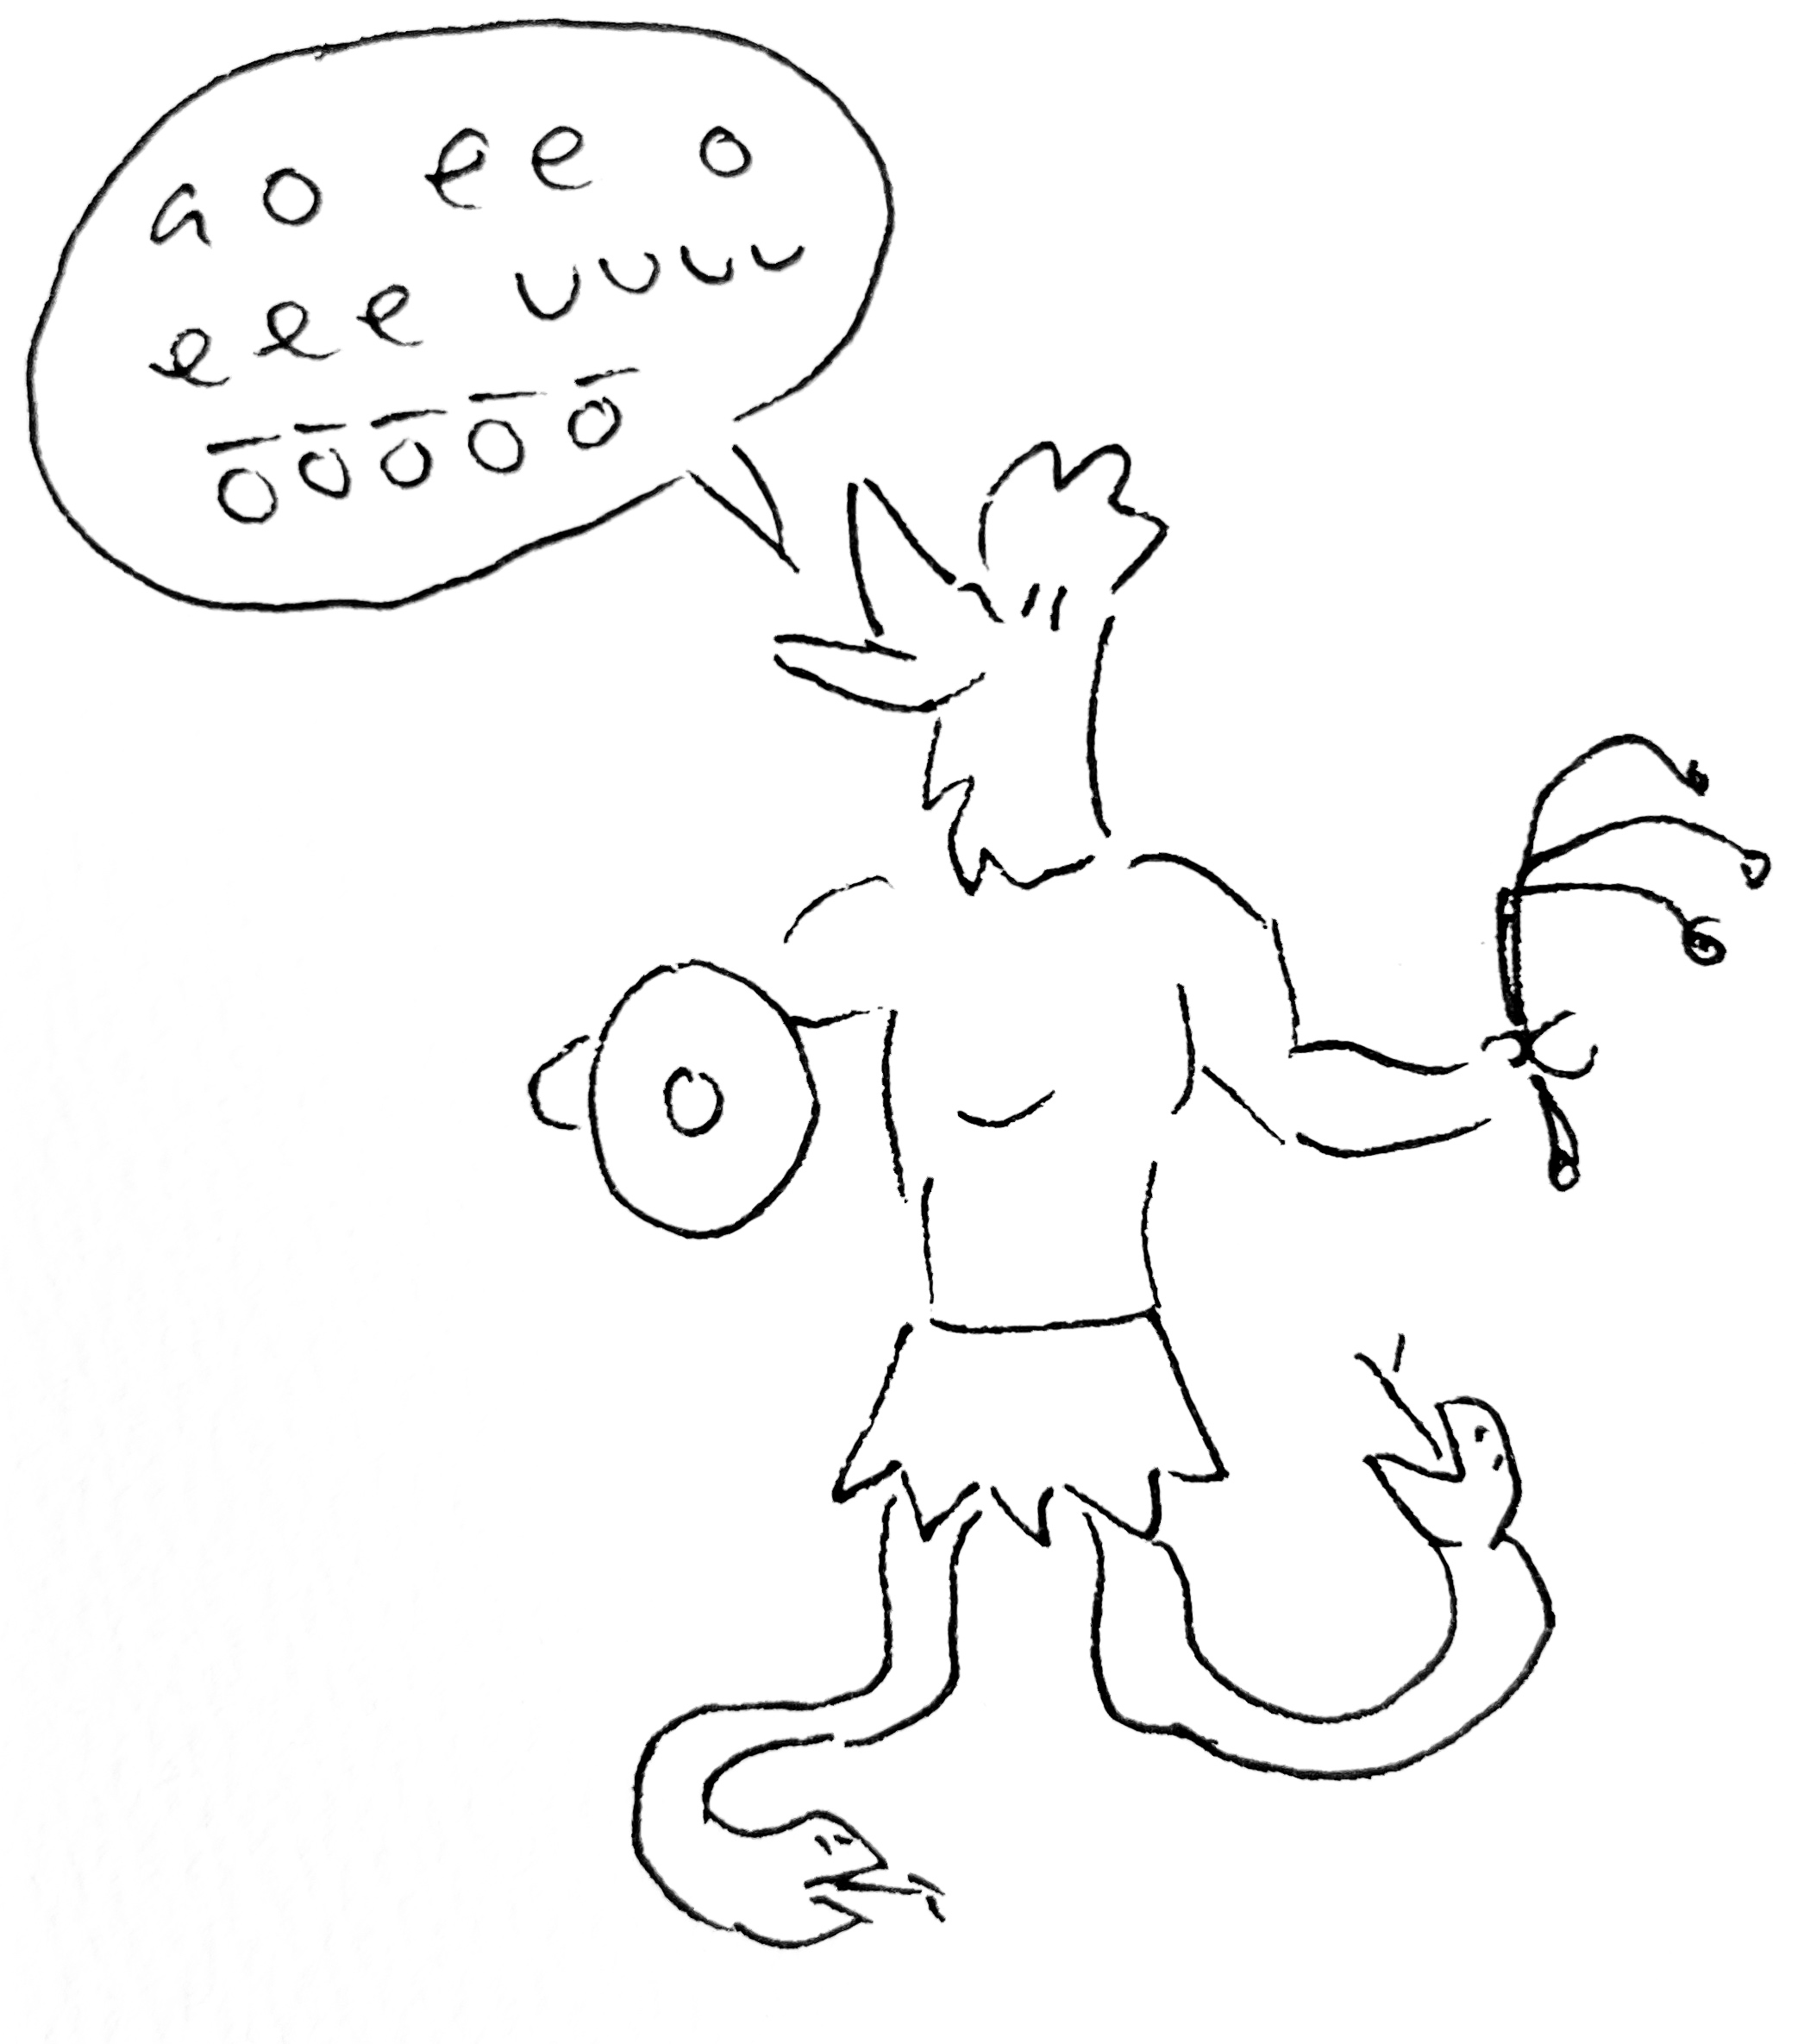 A black-and-white line drawing of Abraxas, a Gnostic deity in the form of a man with a rooster's head and snakes for legs armed with a flail and a shield, saying nonsense syllables